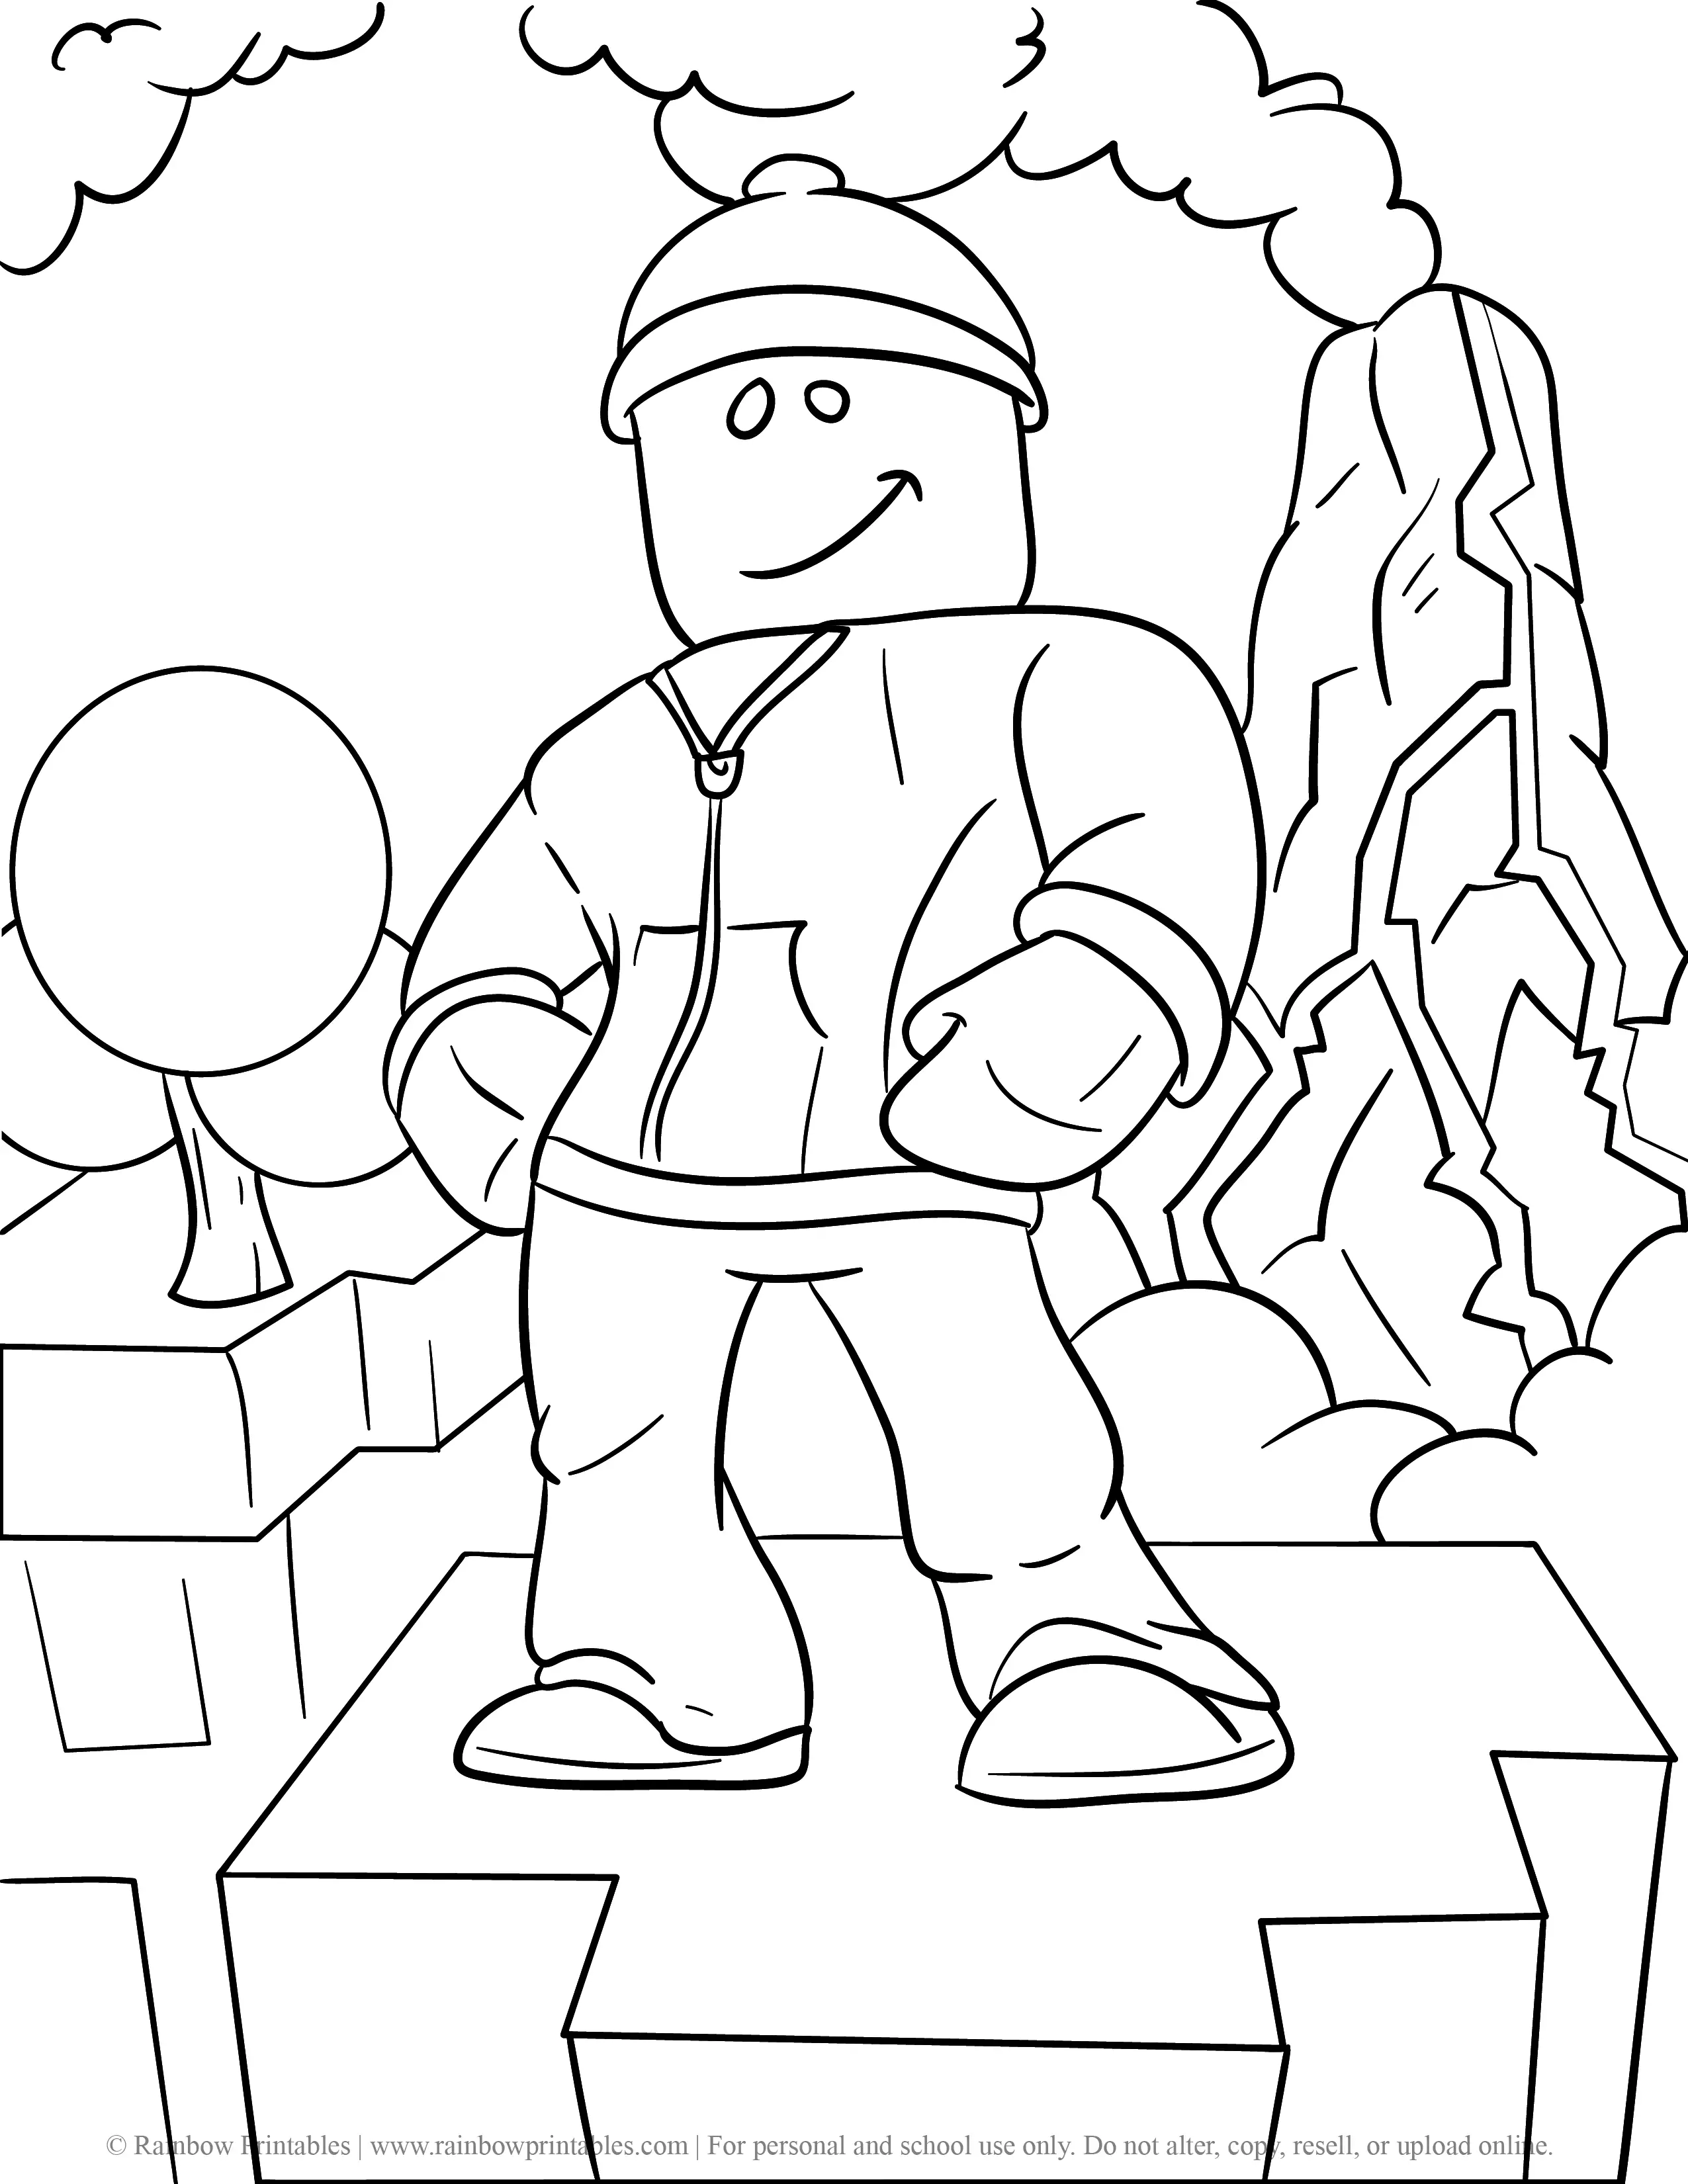 Free Media TV Shows, Movies, Video Games Coloring Pages ...